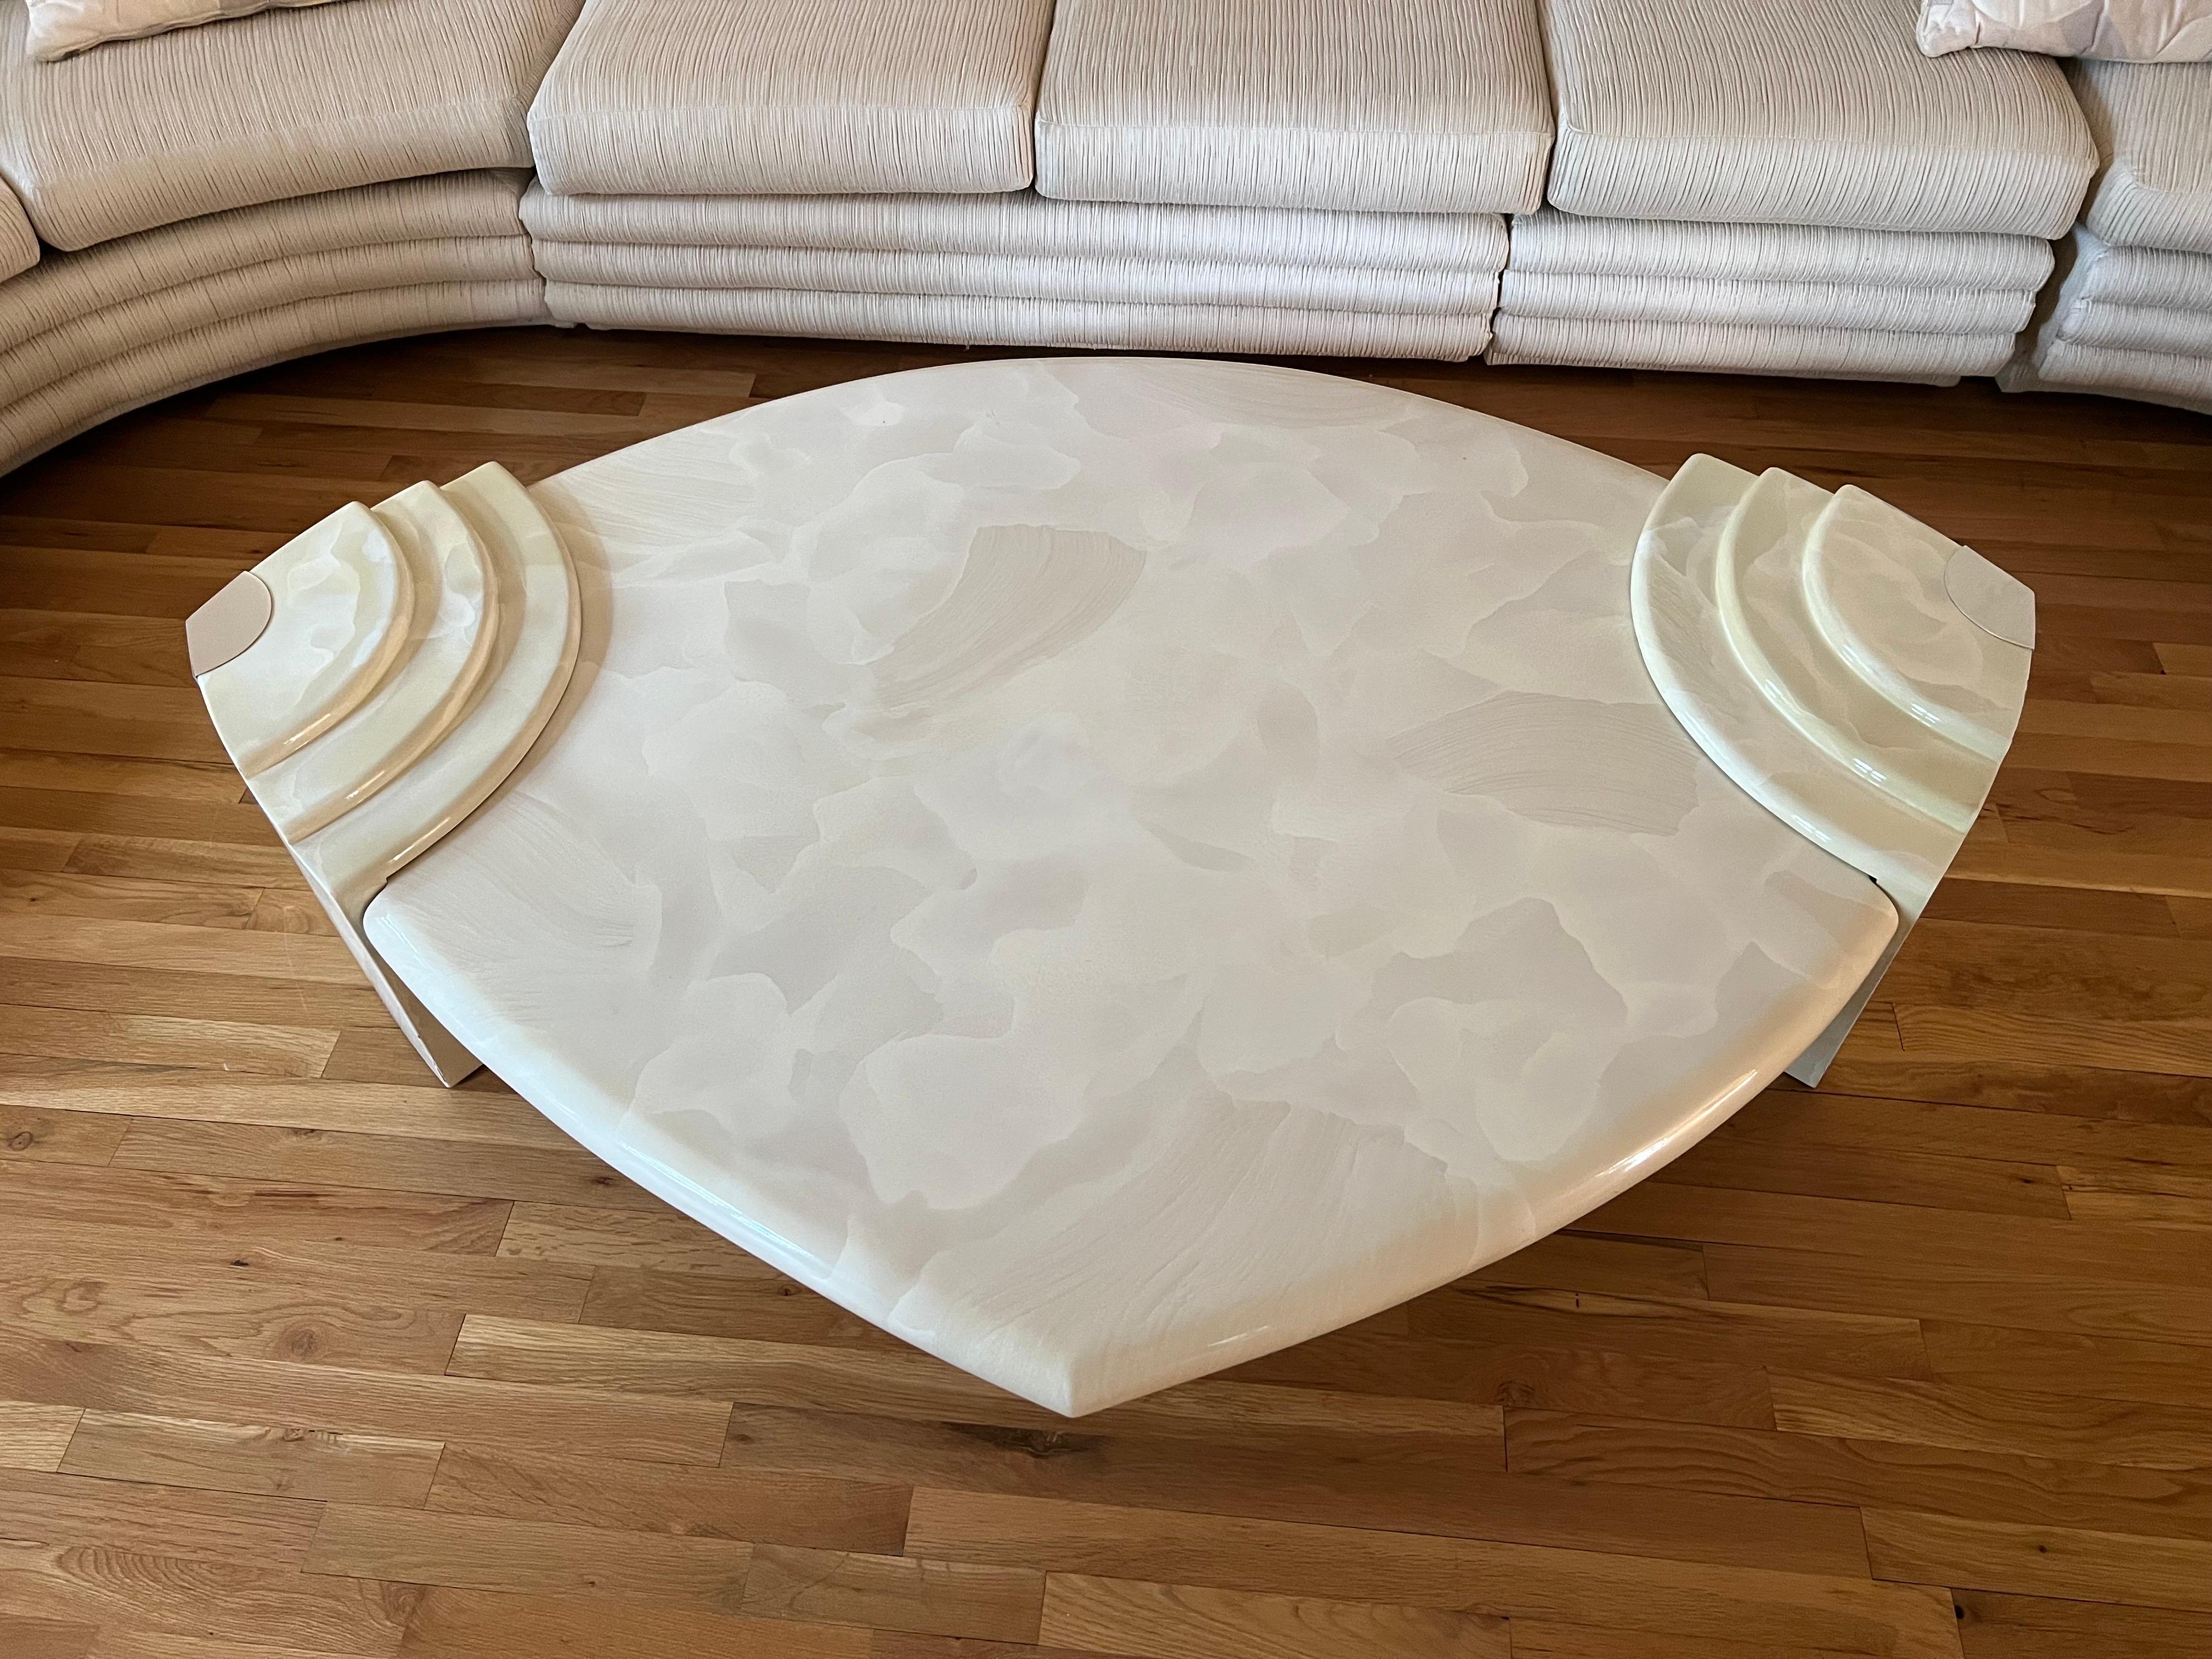 Lacquer coffee table with faux goatskin finished, circa 1980.

Custom made by the original owner, condition consistent with age 